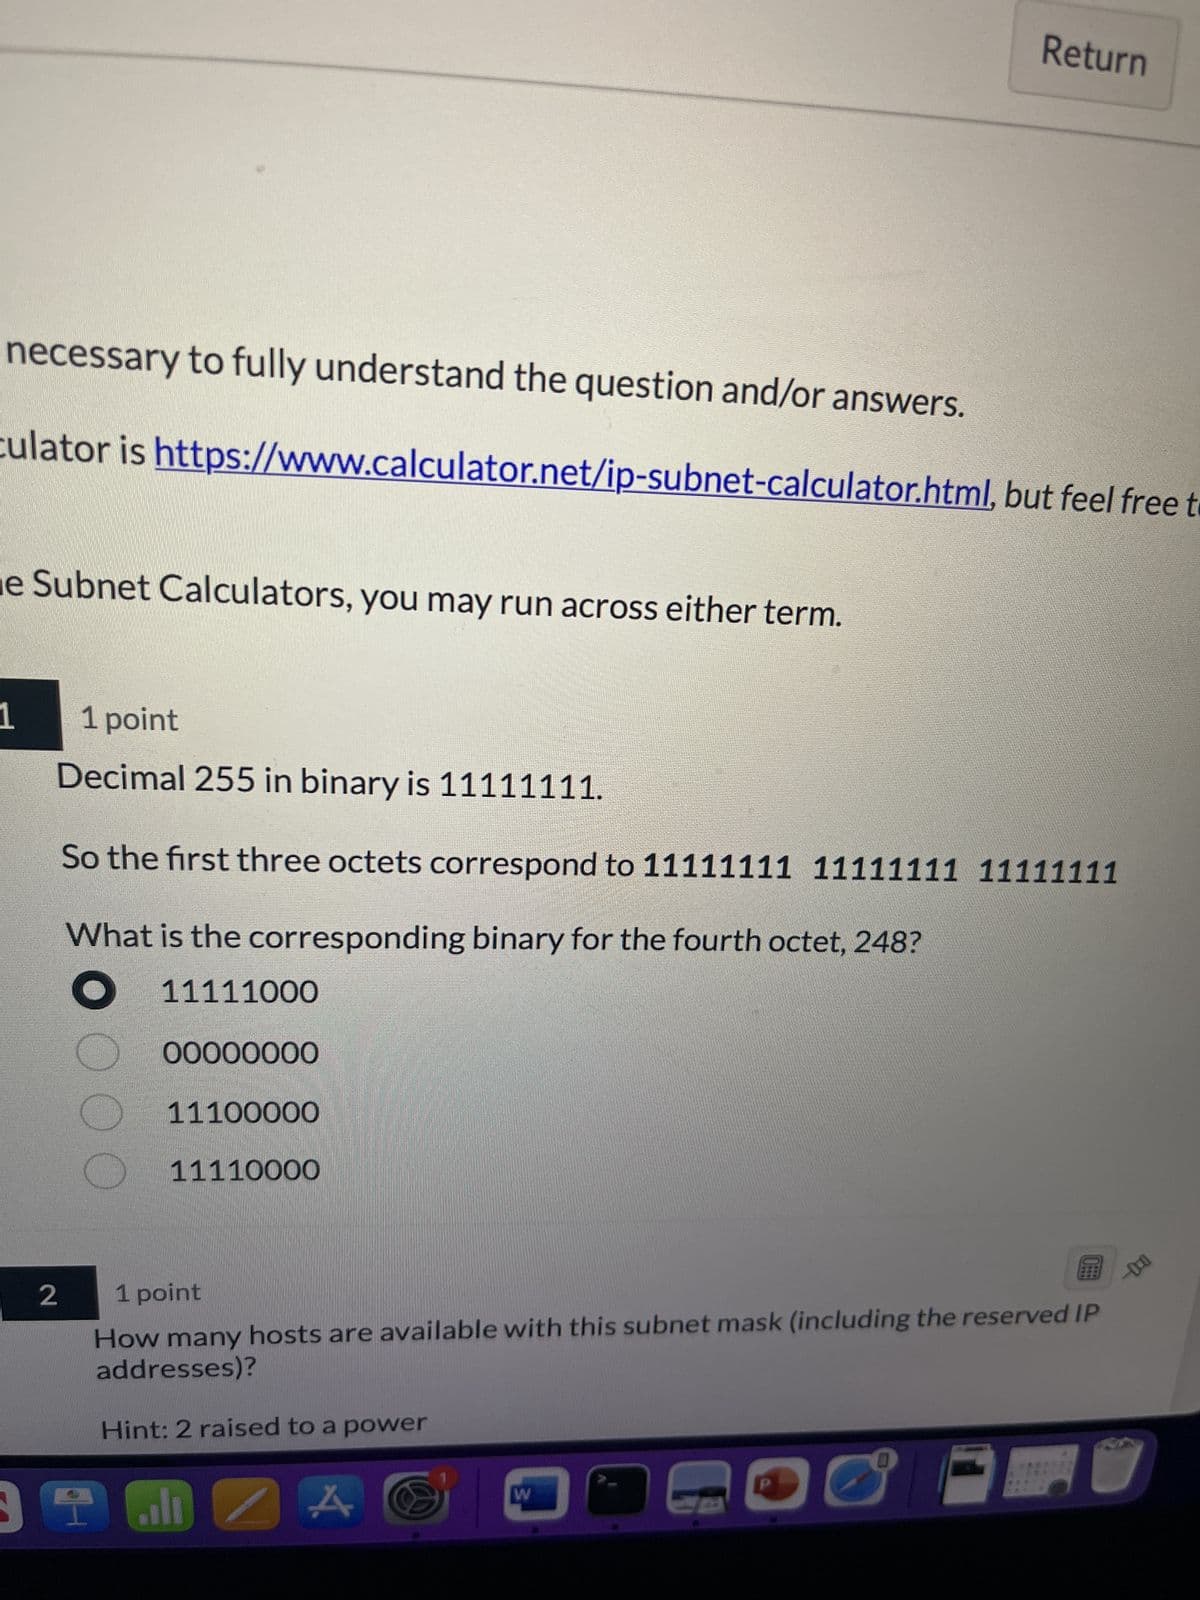 necessary to fully understand the question and/or answers.
culator is https://www.calculator.net/ip-subnet-calculator.html, but feel free to
e Subnet Calculators, you may run across either term.
1
1 point
Decimal 255 in binary is 11111111.
So the first three octets correspond to 11111111 11111111 11111111
What is the corresponding binary for the fourth octet, 248?
11111000
2
O O O O
00000000
11100000
11110000
1 point
B
How many hosts are available with this subnet mask (including the reserved IP
addresses)?
Hint: 2 raised to a power
39 GDZ
Return
A
W
C